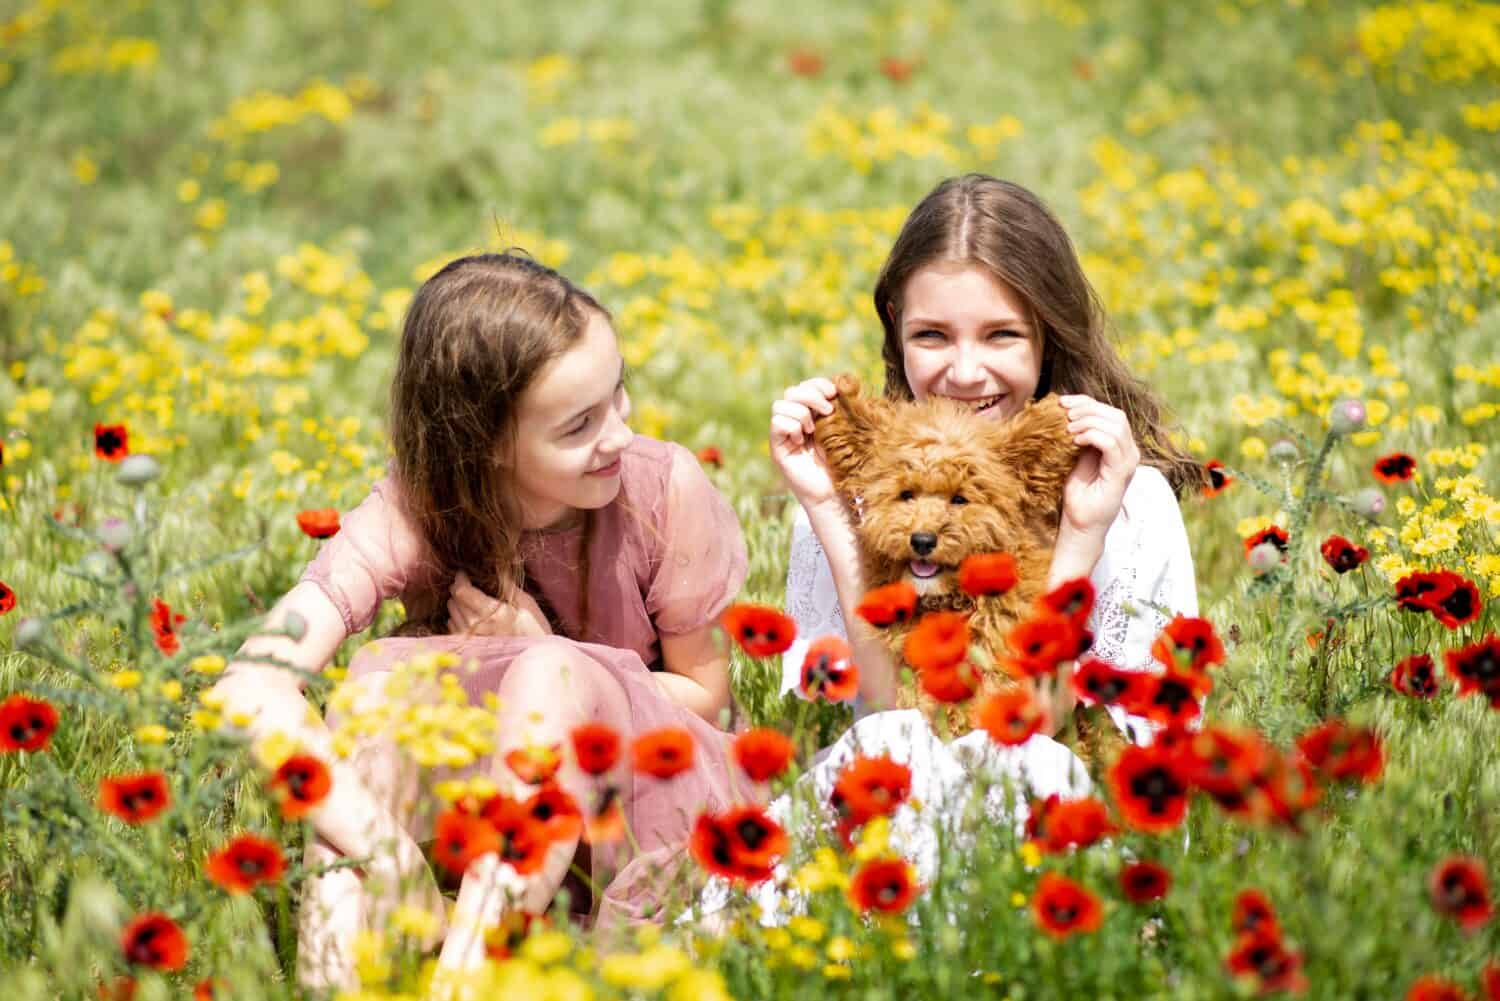 Two teenage girls with a dog in nature communicate and have fun. The dog breed toy poodle of red color. The girls are in a meadow with yellow flowers and poppies. It's spring and sunny outside. Happy.